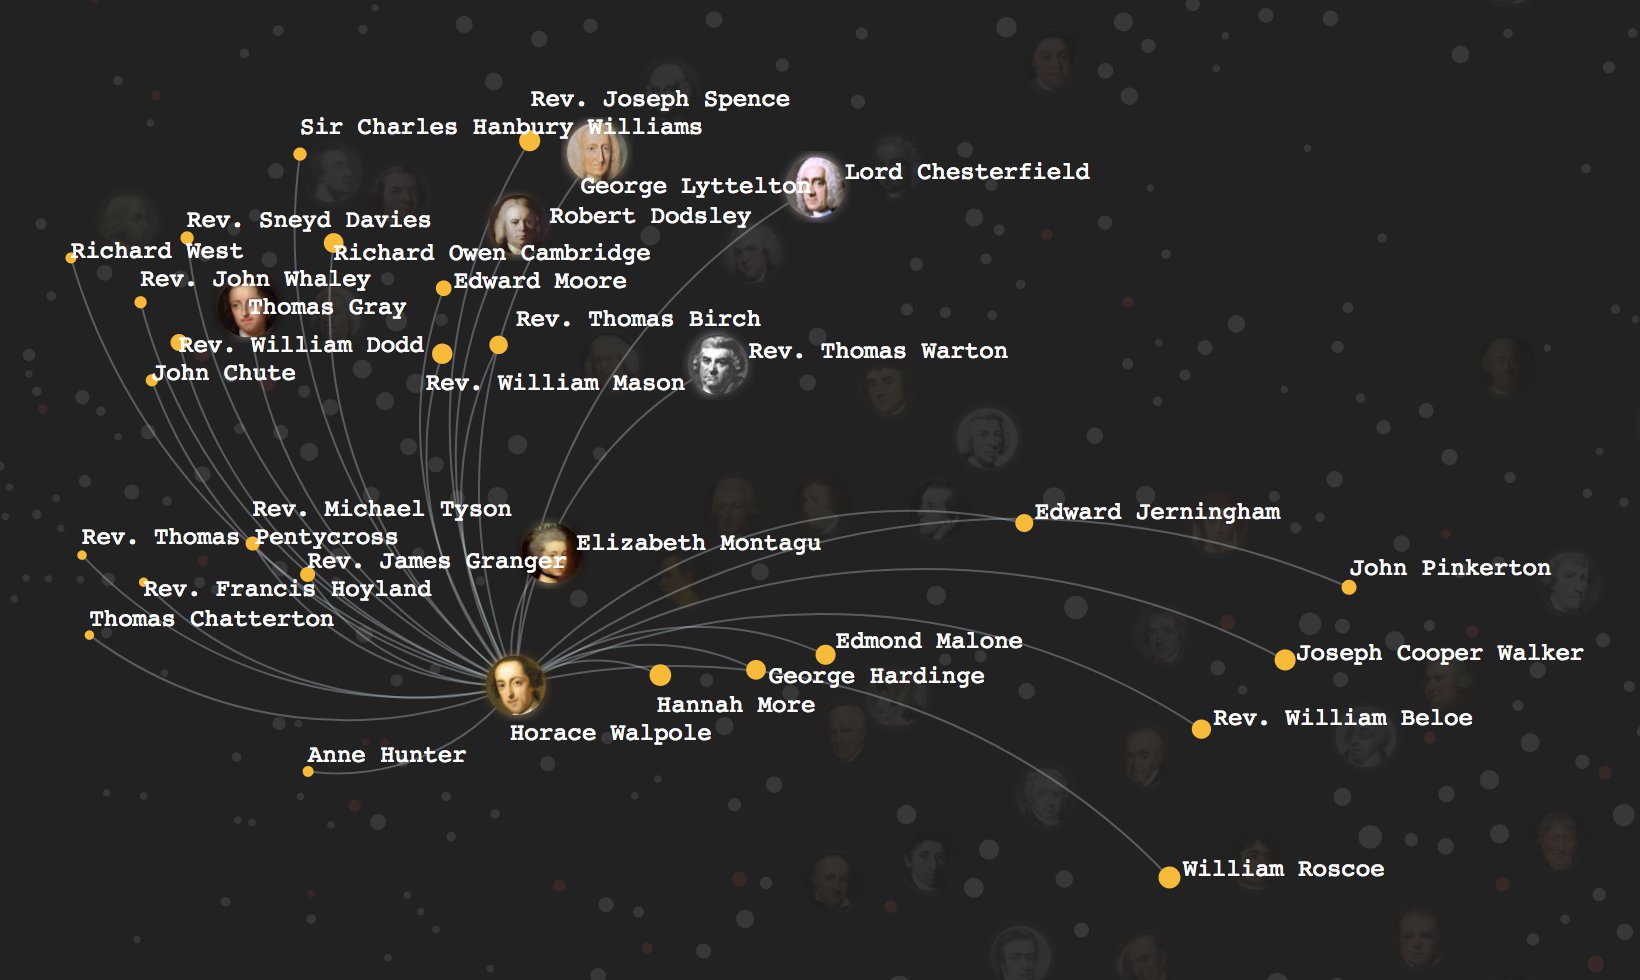 Network visualization of Horace Walpole's connections with other poets